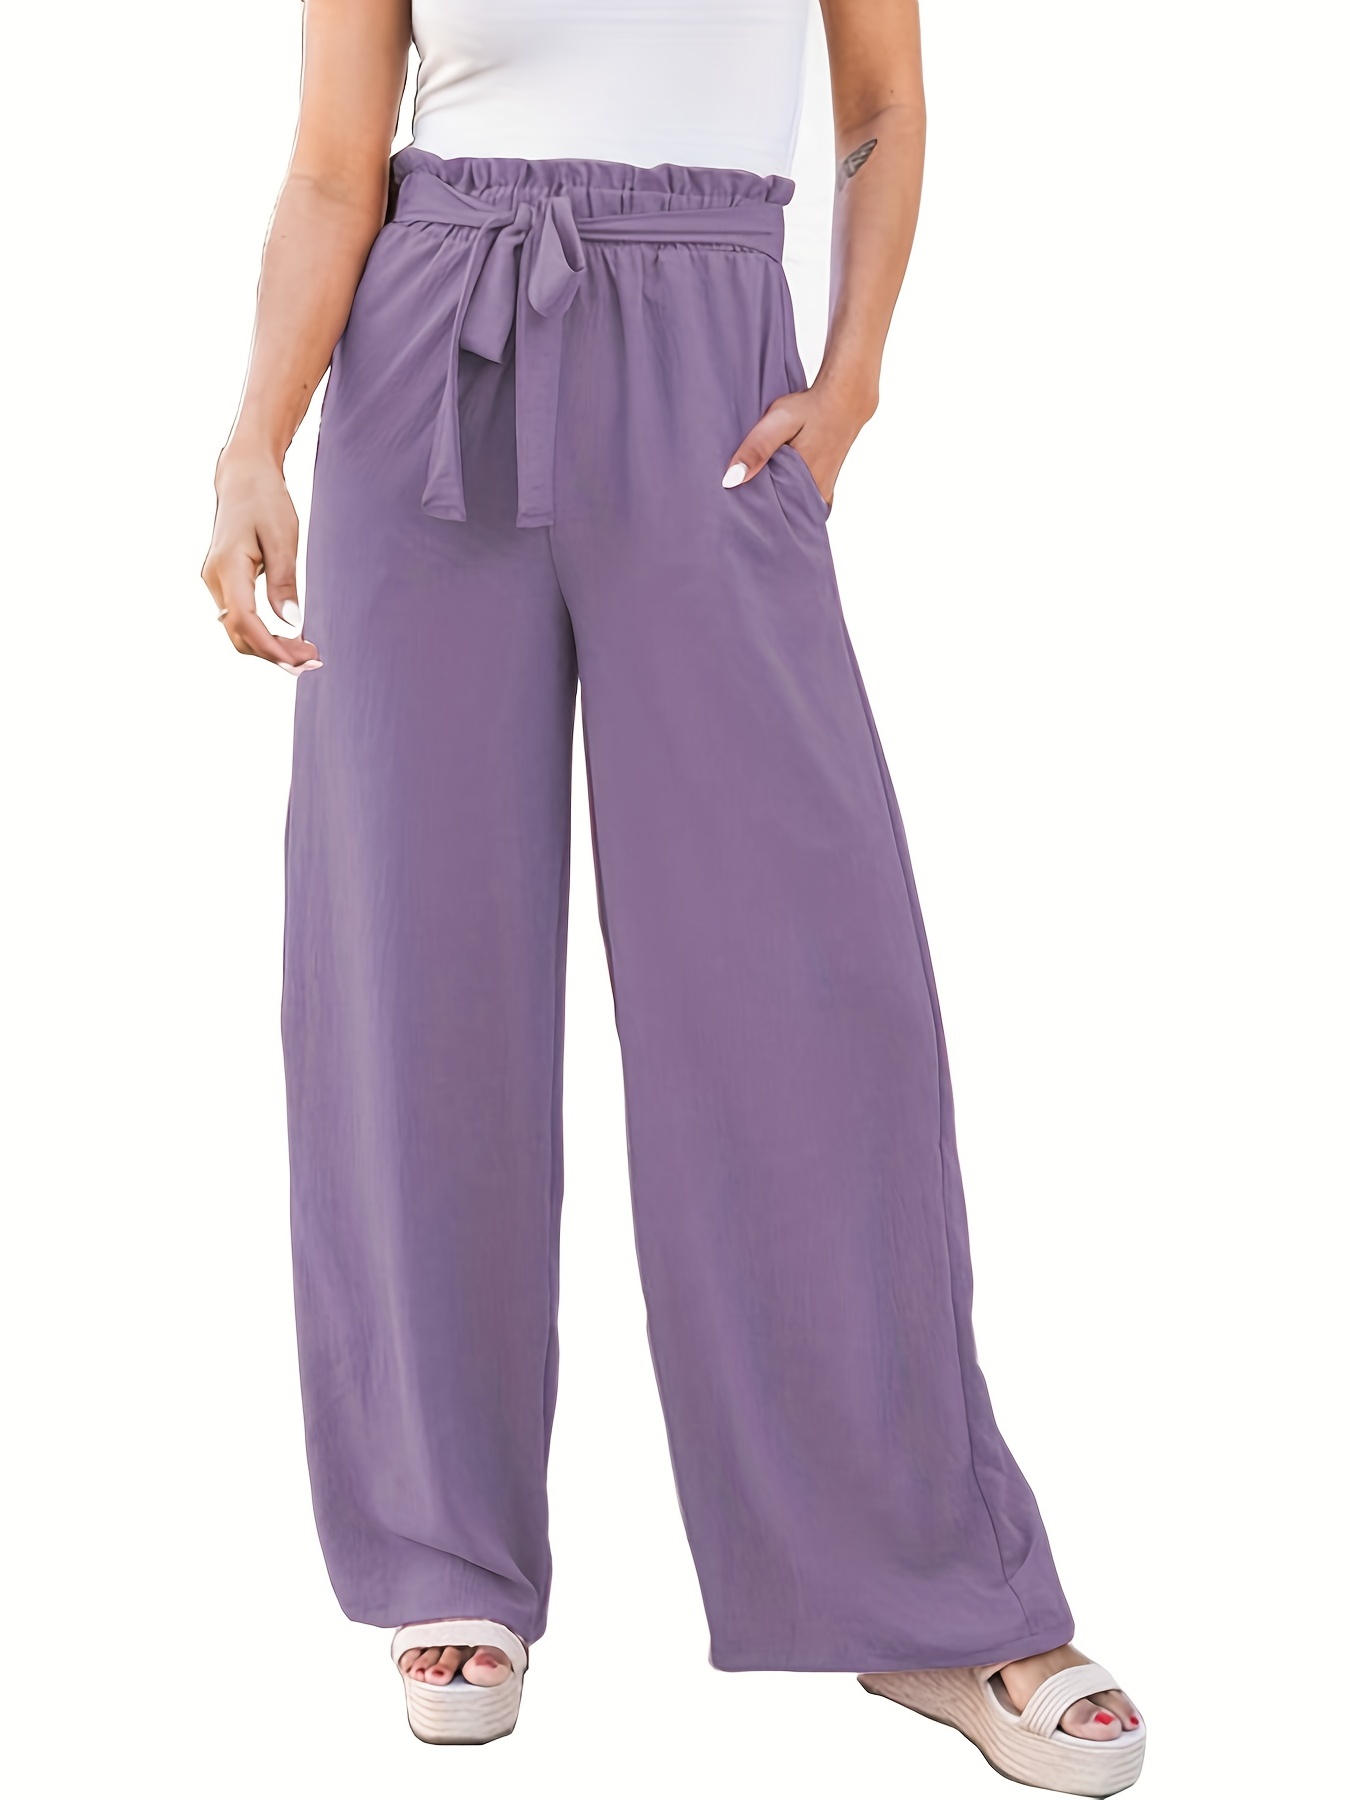 Aayomet Flowy Pants for Women Women's Fashion Casual Stretchy Wide Leg  Palazzo Pants Summer Leisure High Wide Leg Cover up Pants,Purple XXL